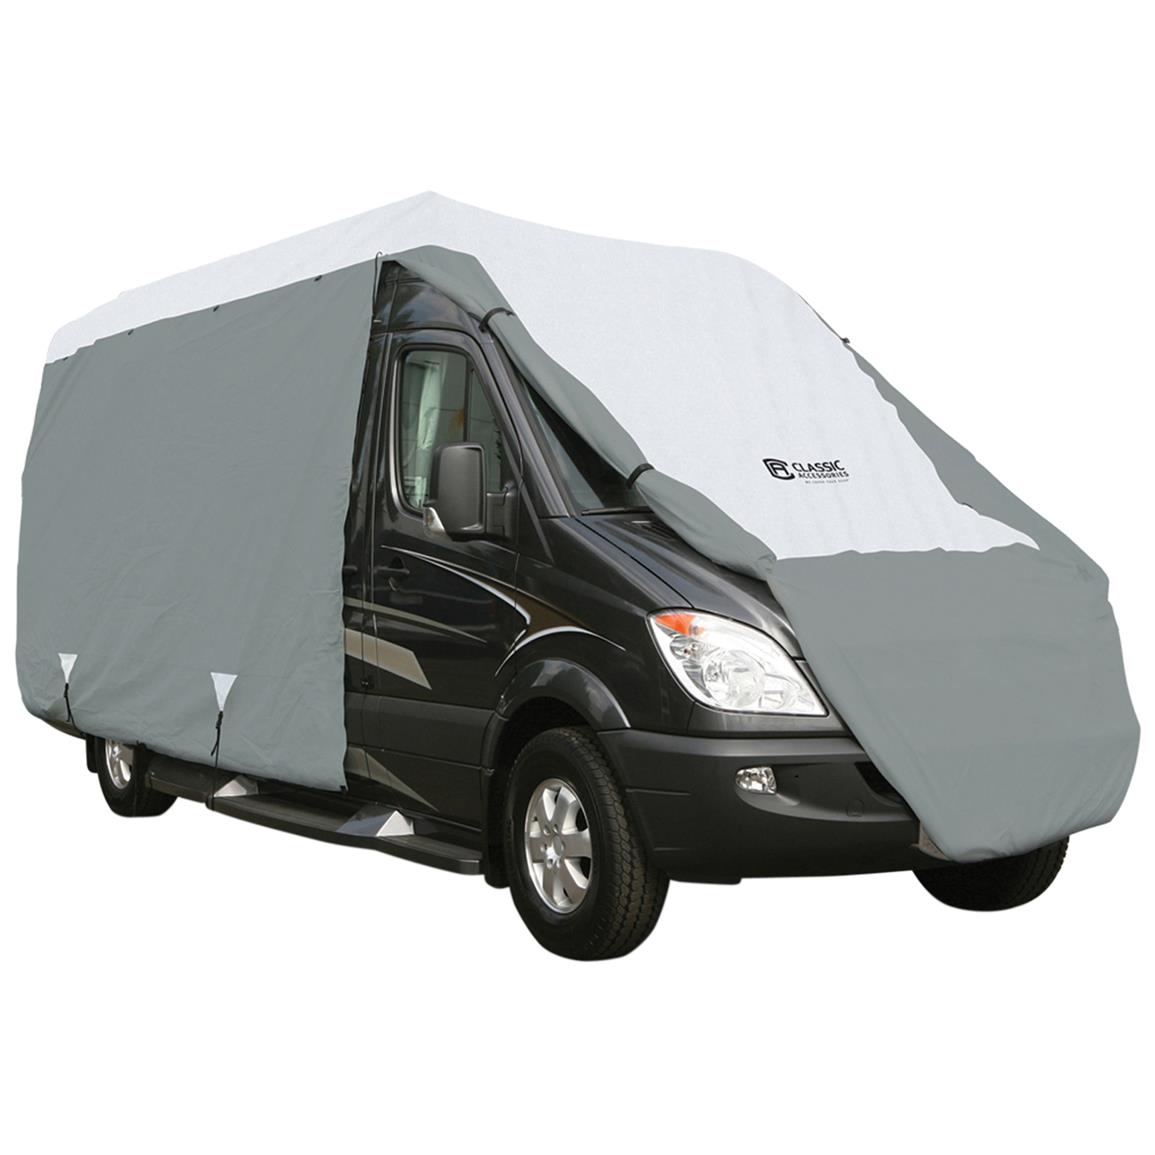 Classic Accessories™ PolyPRO 3™ Class B RV Cover